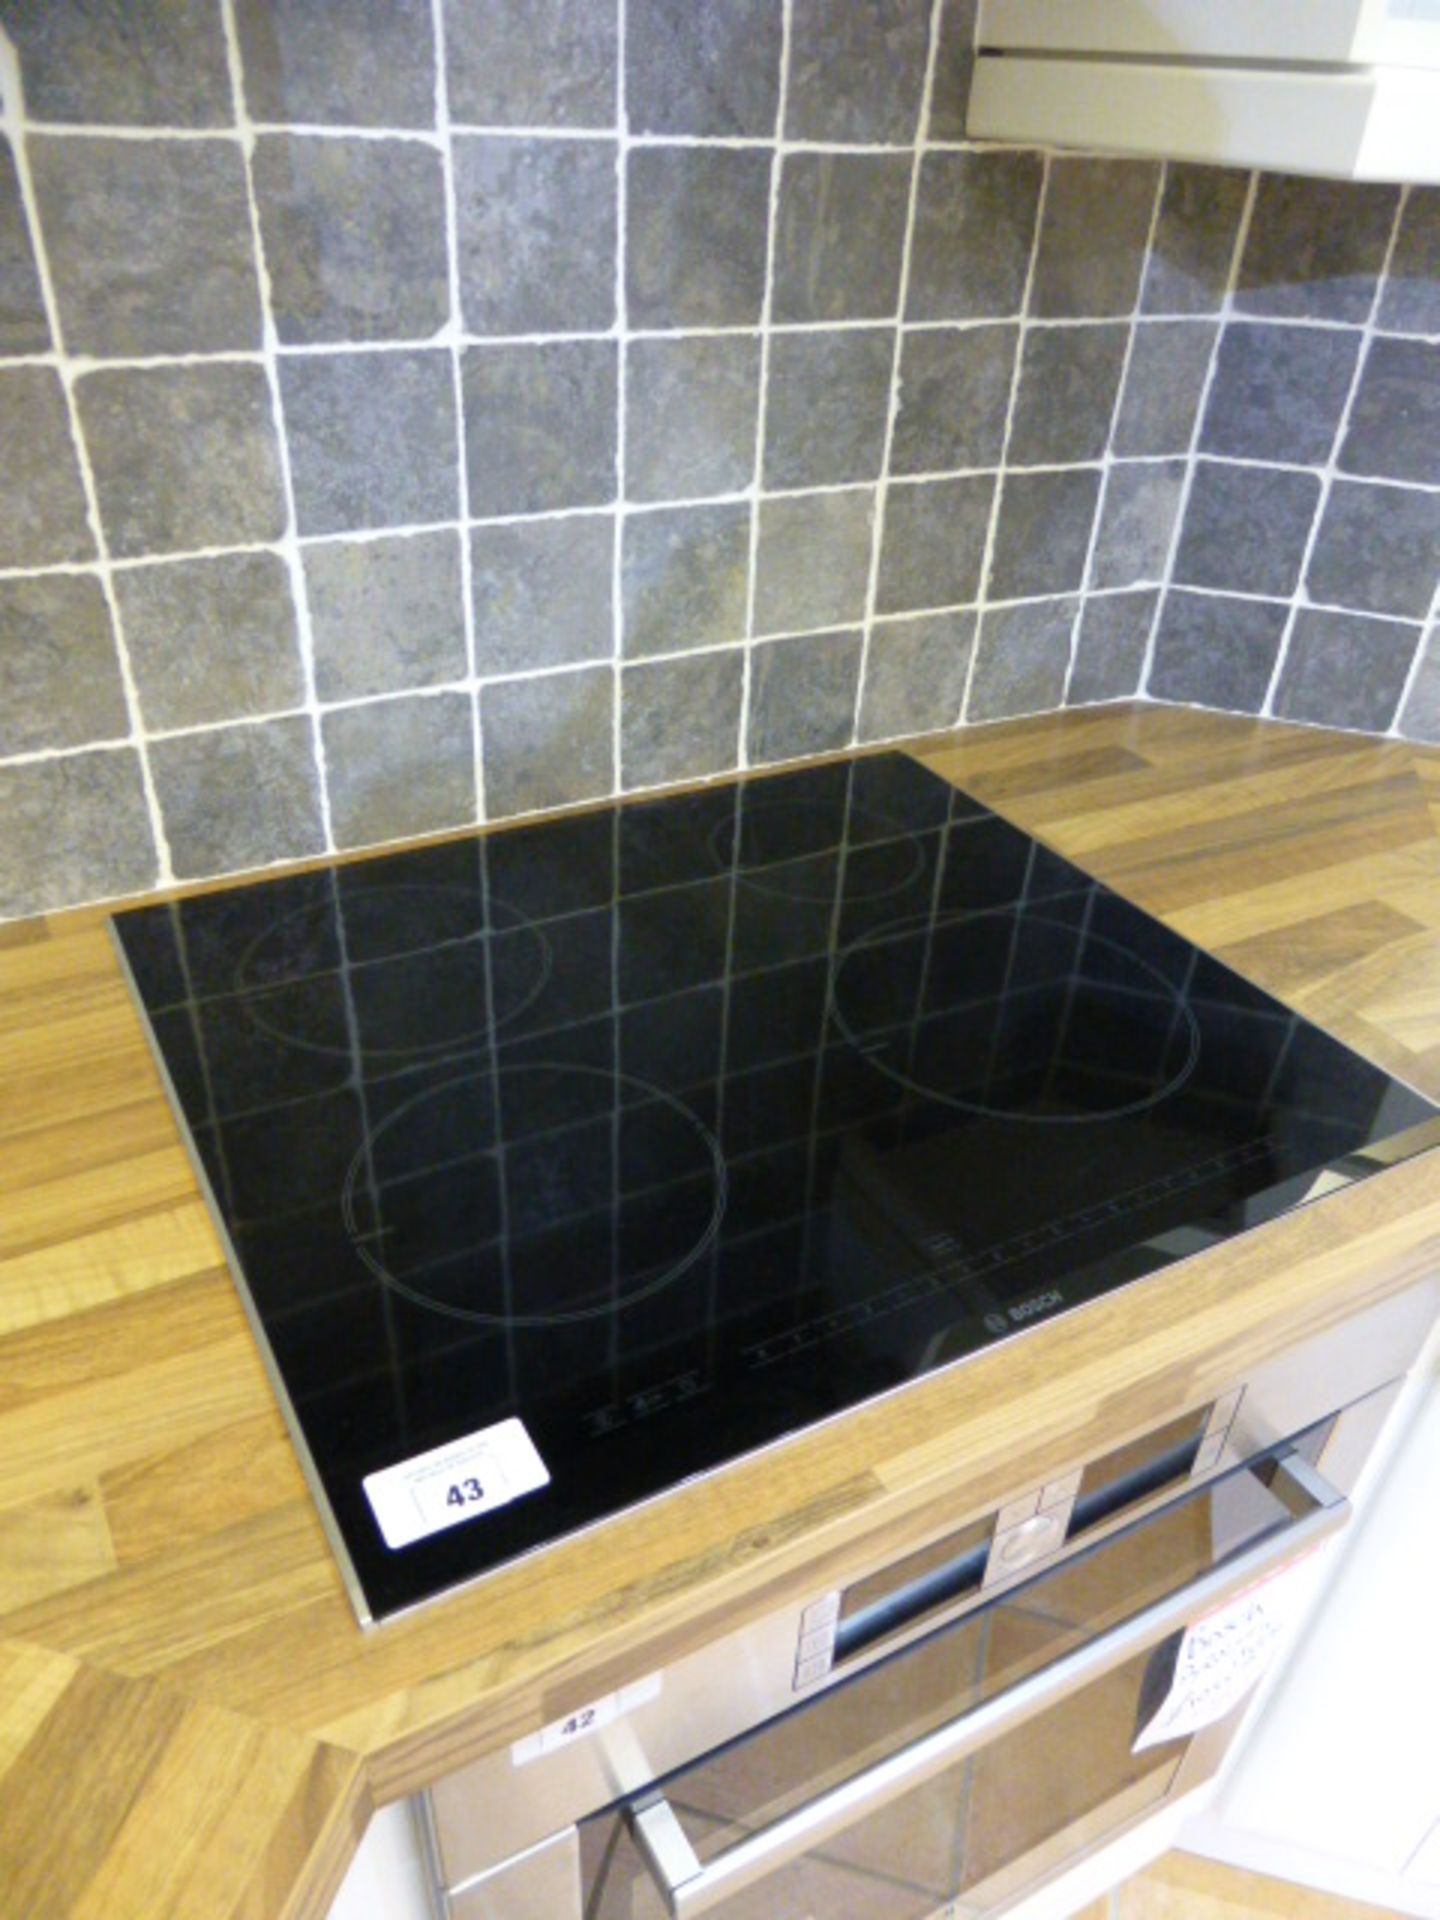 Bosch 60cm 4 ring induction hob - Image 2 of 2